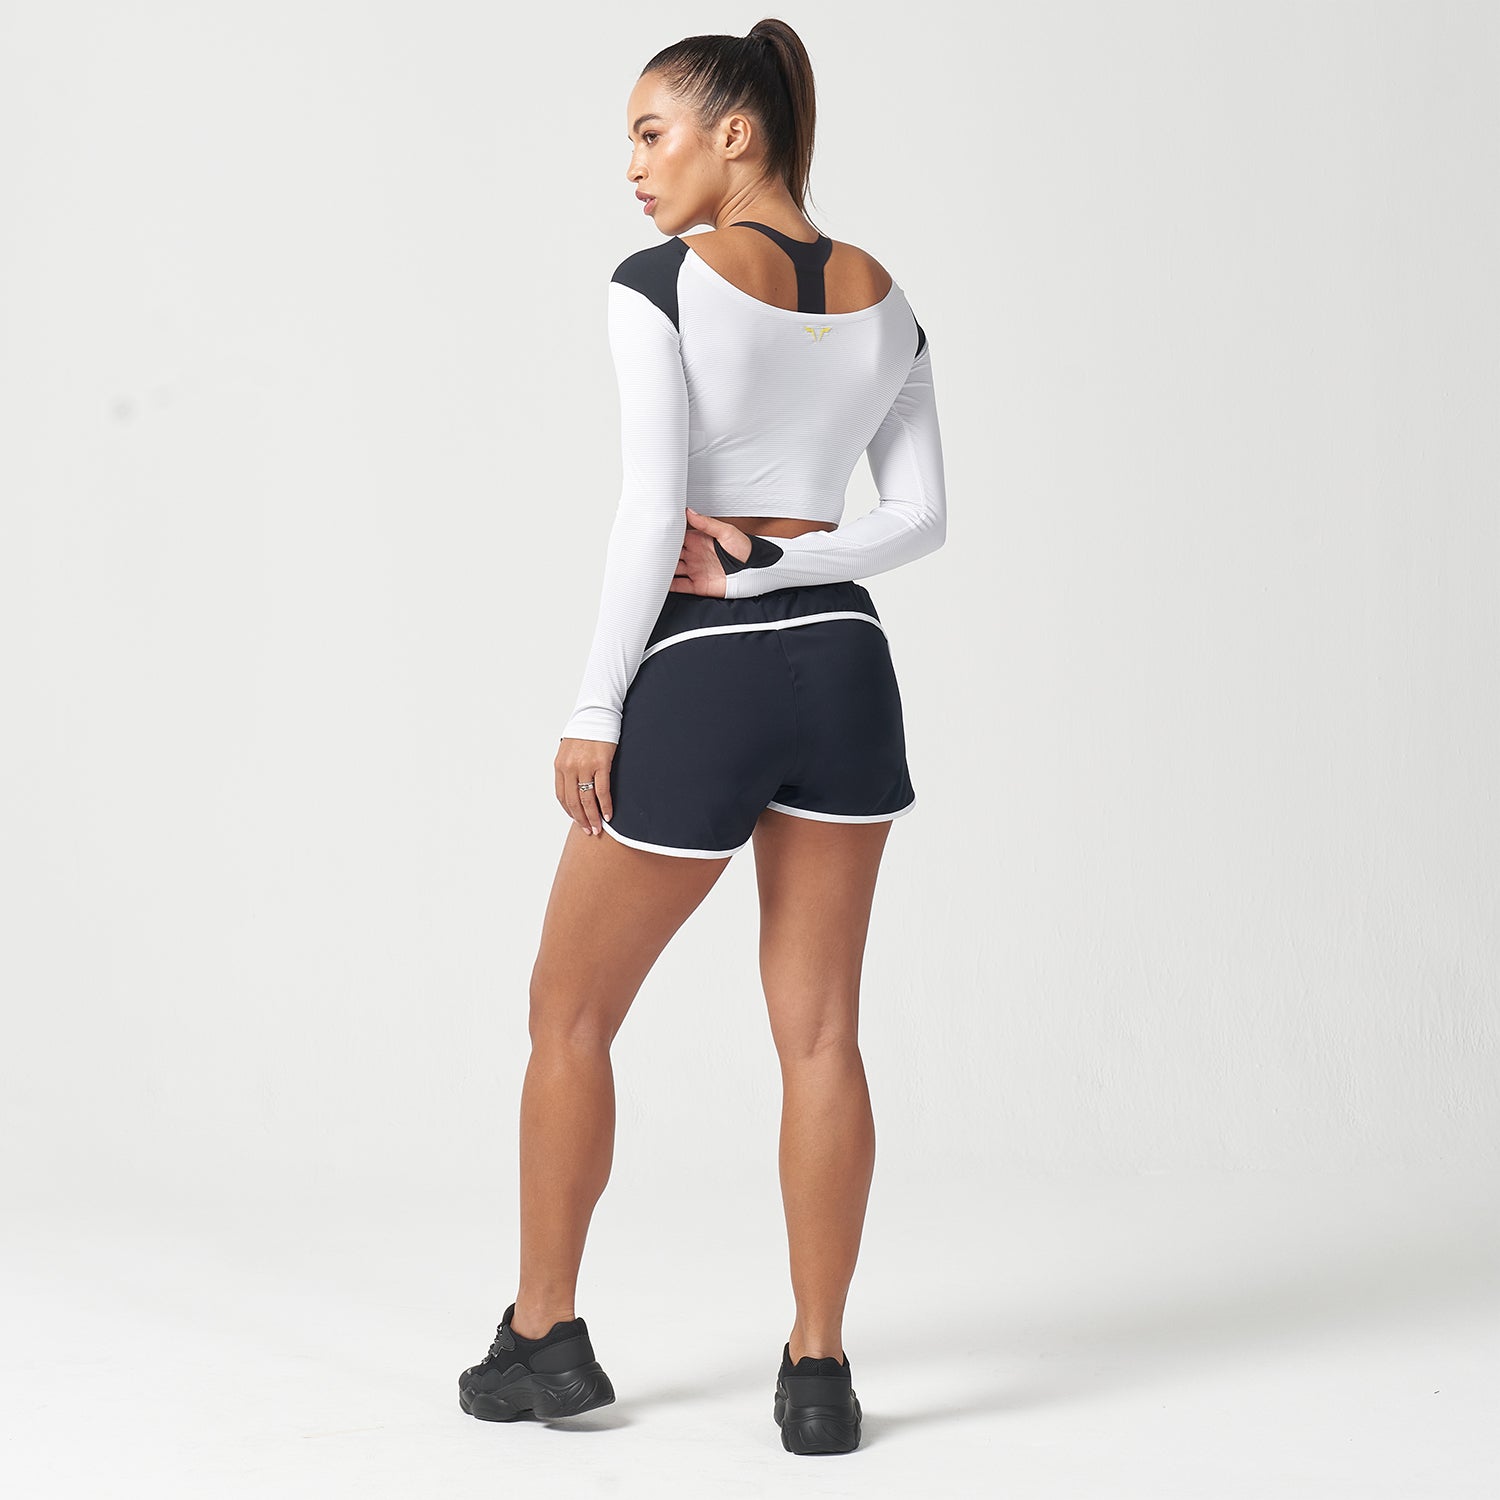 squatwolf-workout-clothes-lab360-impact-crop-top-white-gym-tank-tops-for-women